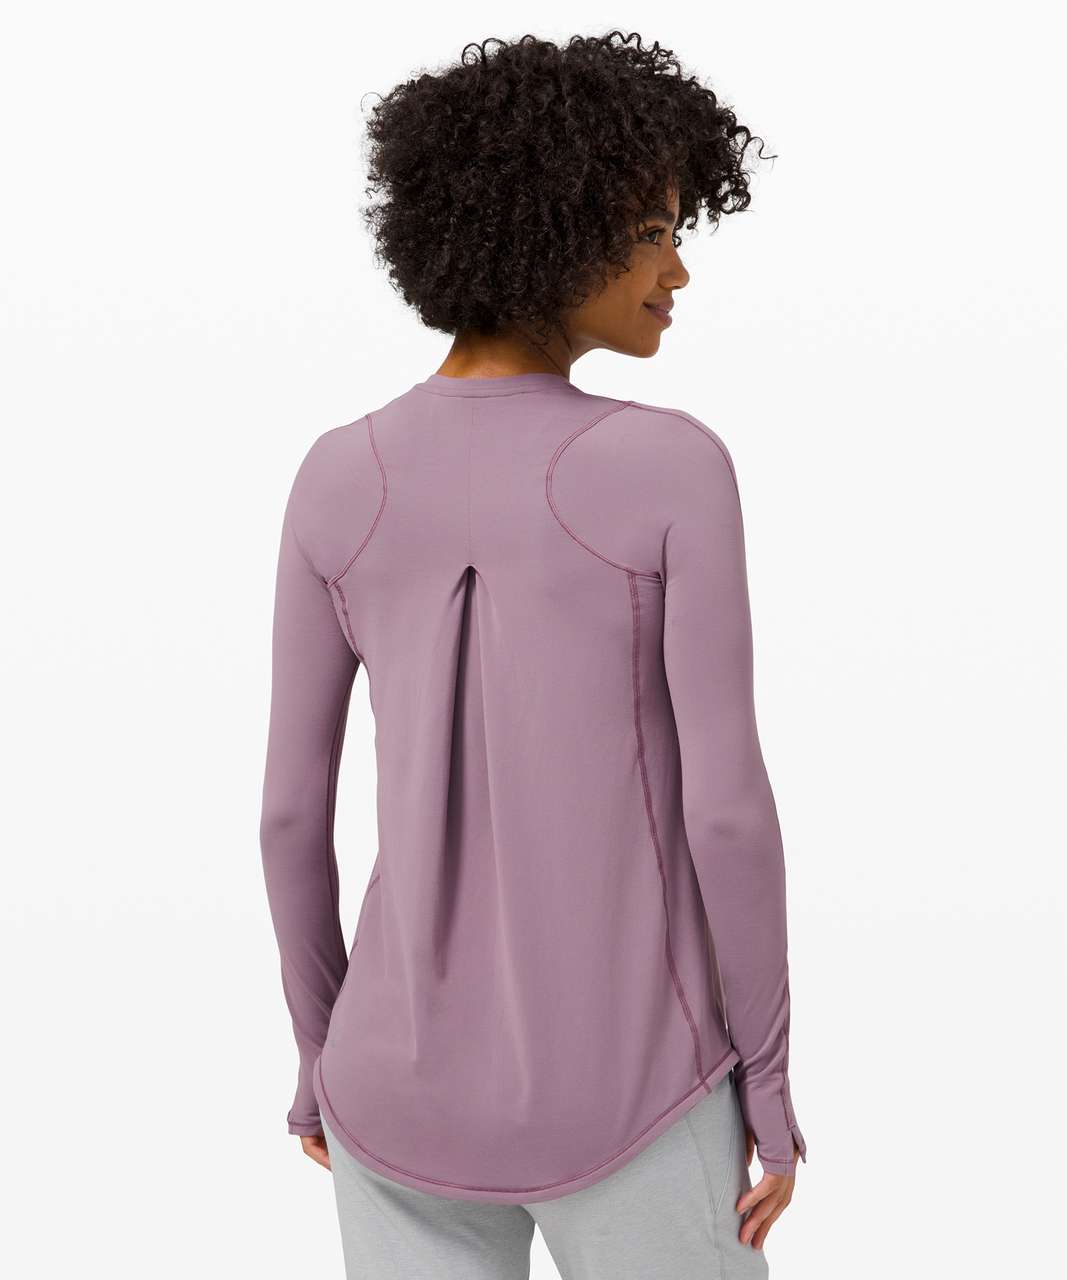 Lululemon Still Lotus Sweater *Reversible - Heathered Frosted Mulberry /  Heathered Silver Lilac / Heathered Frosted Mulberry - lulu fanatics